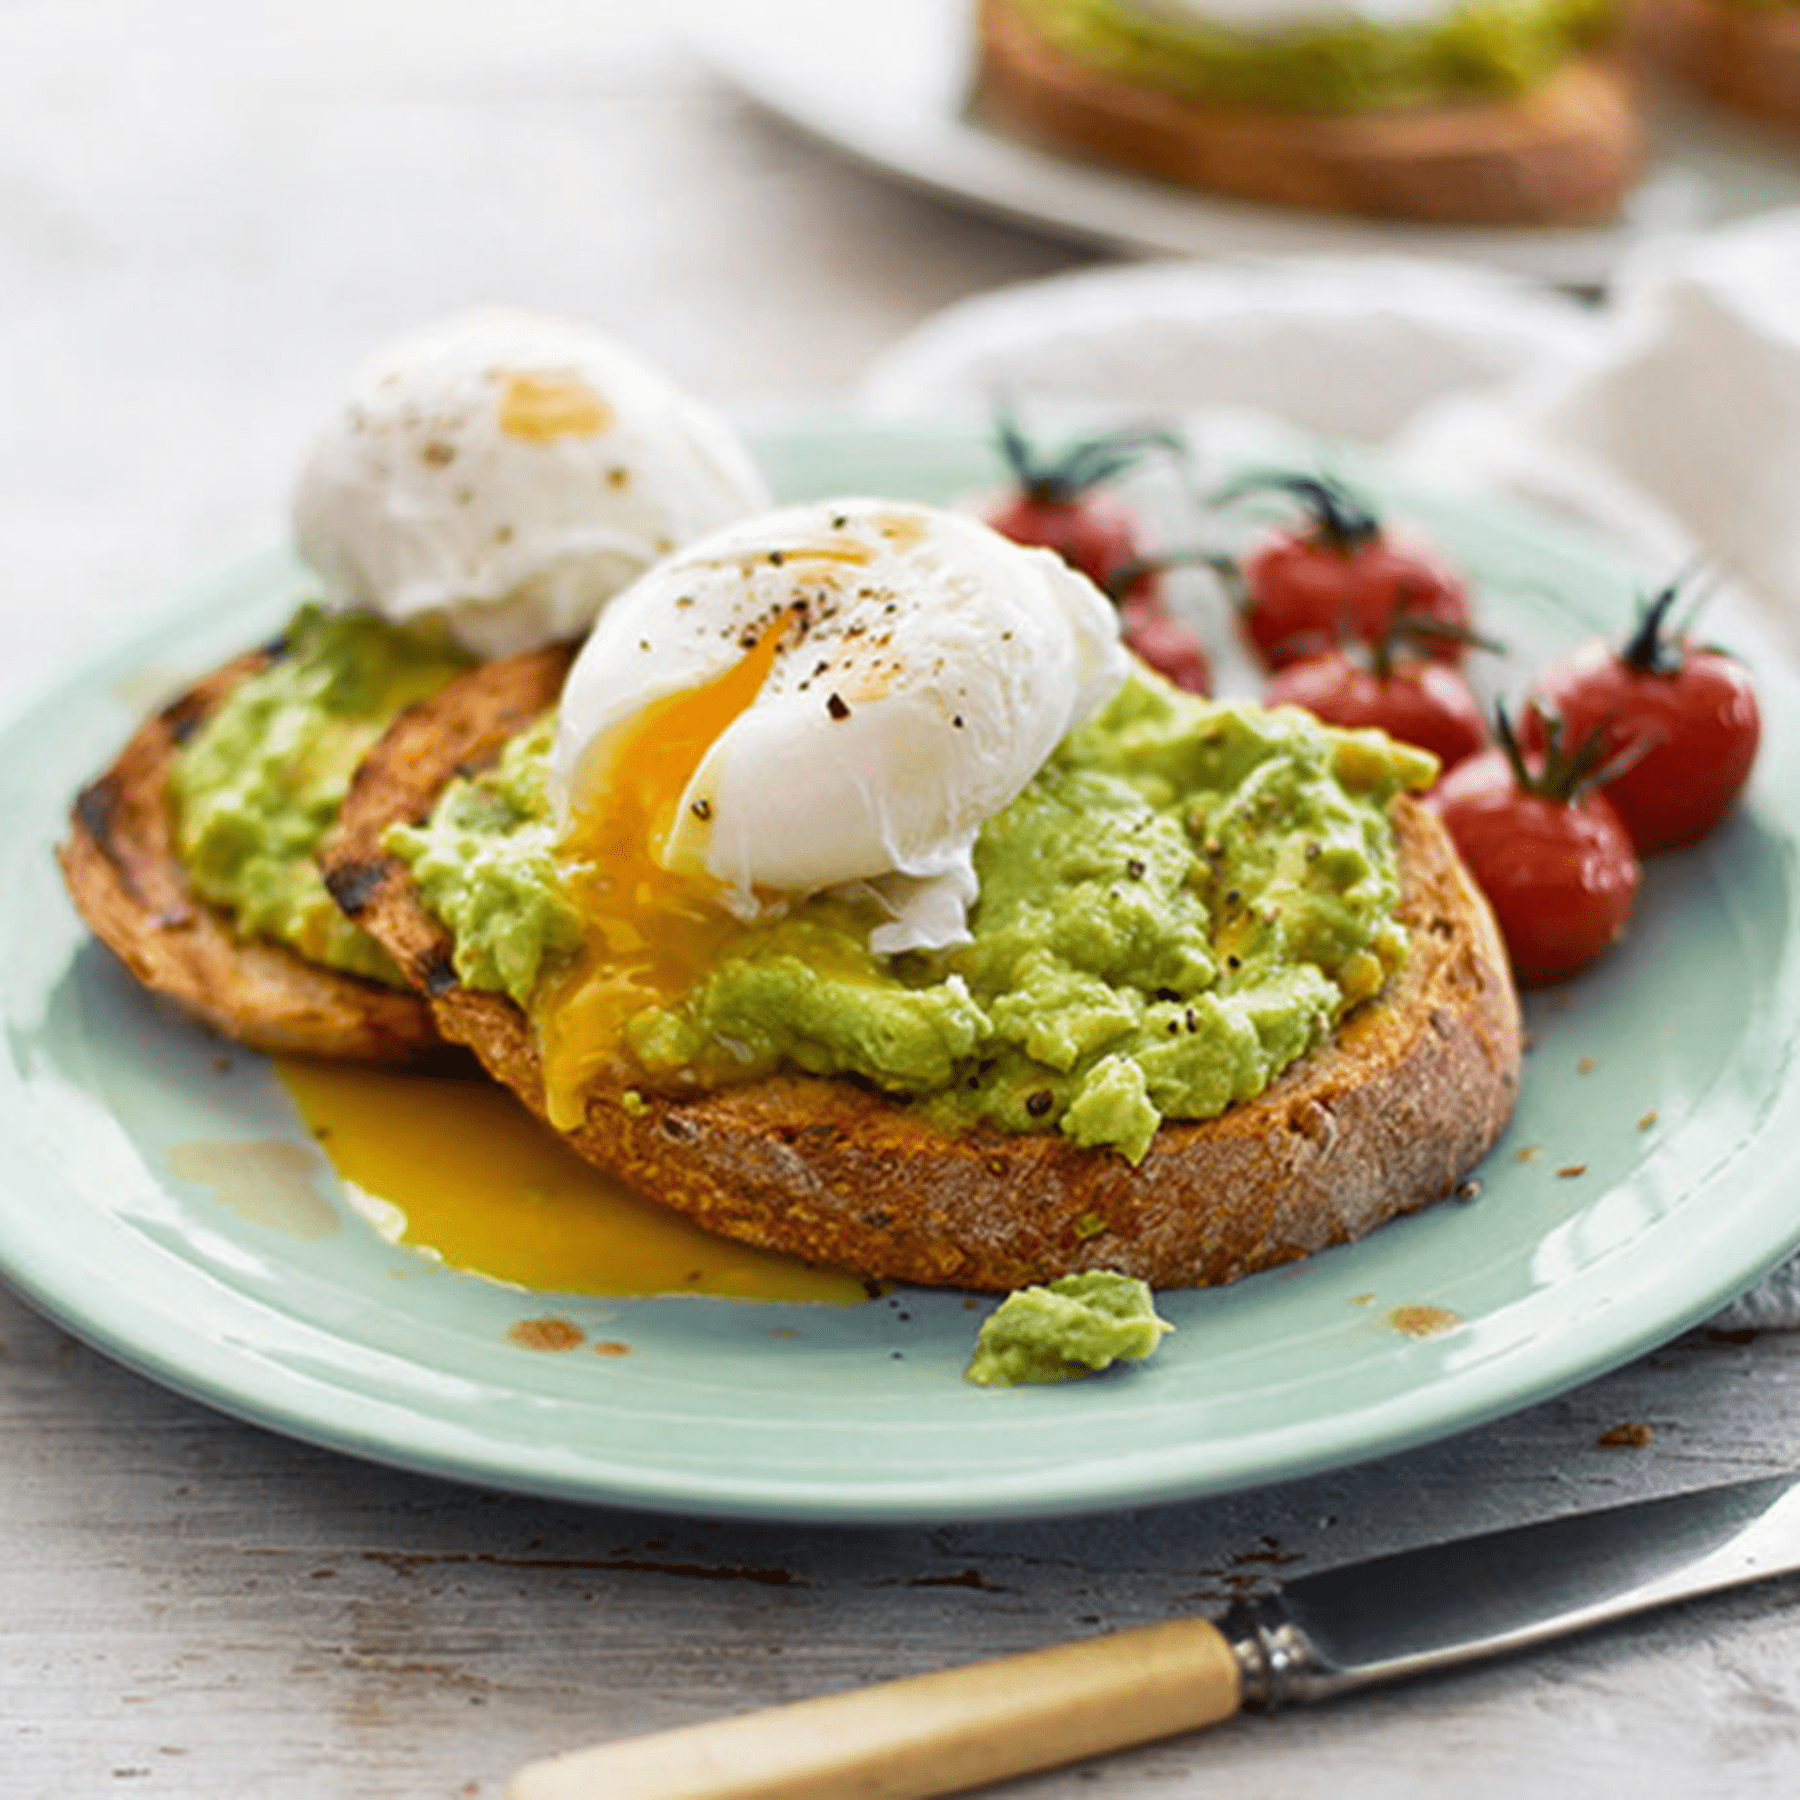 Revitalize Your Mornings: 7 Mouthwatering Breakfast Recipes to Supercharge Your Day